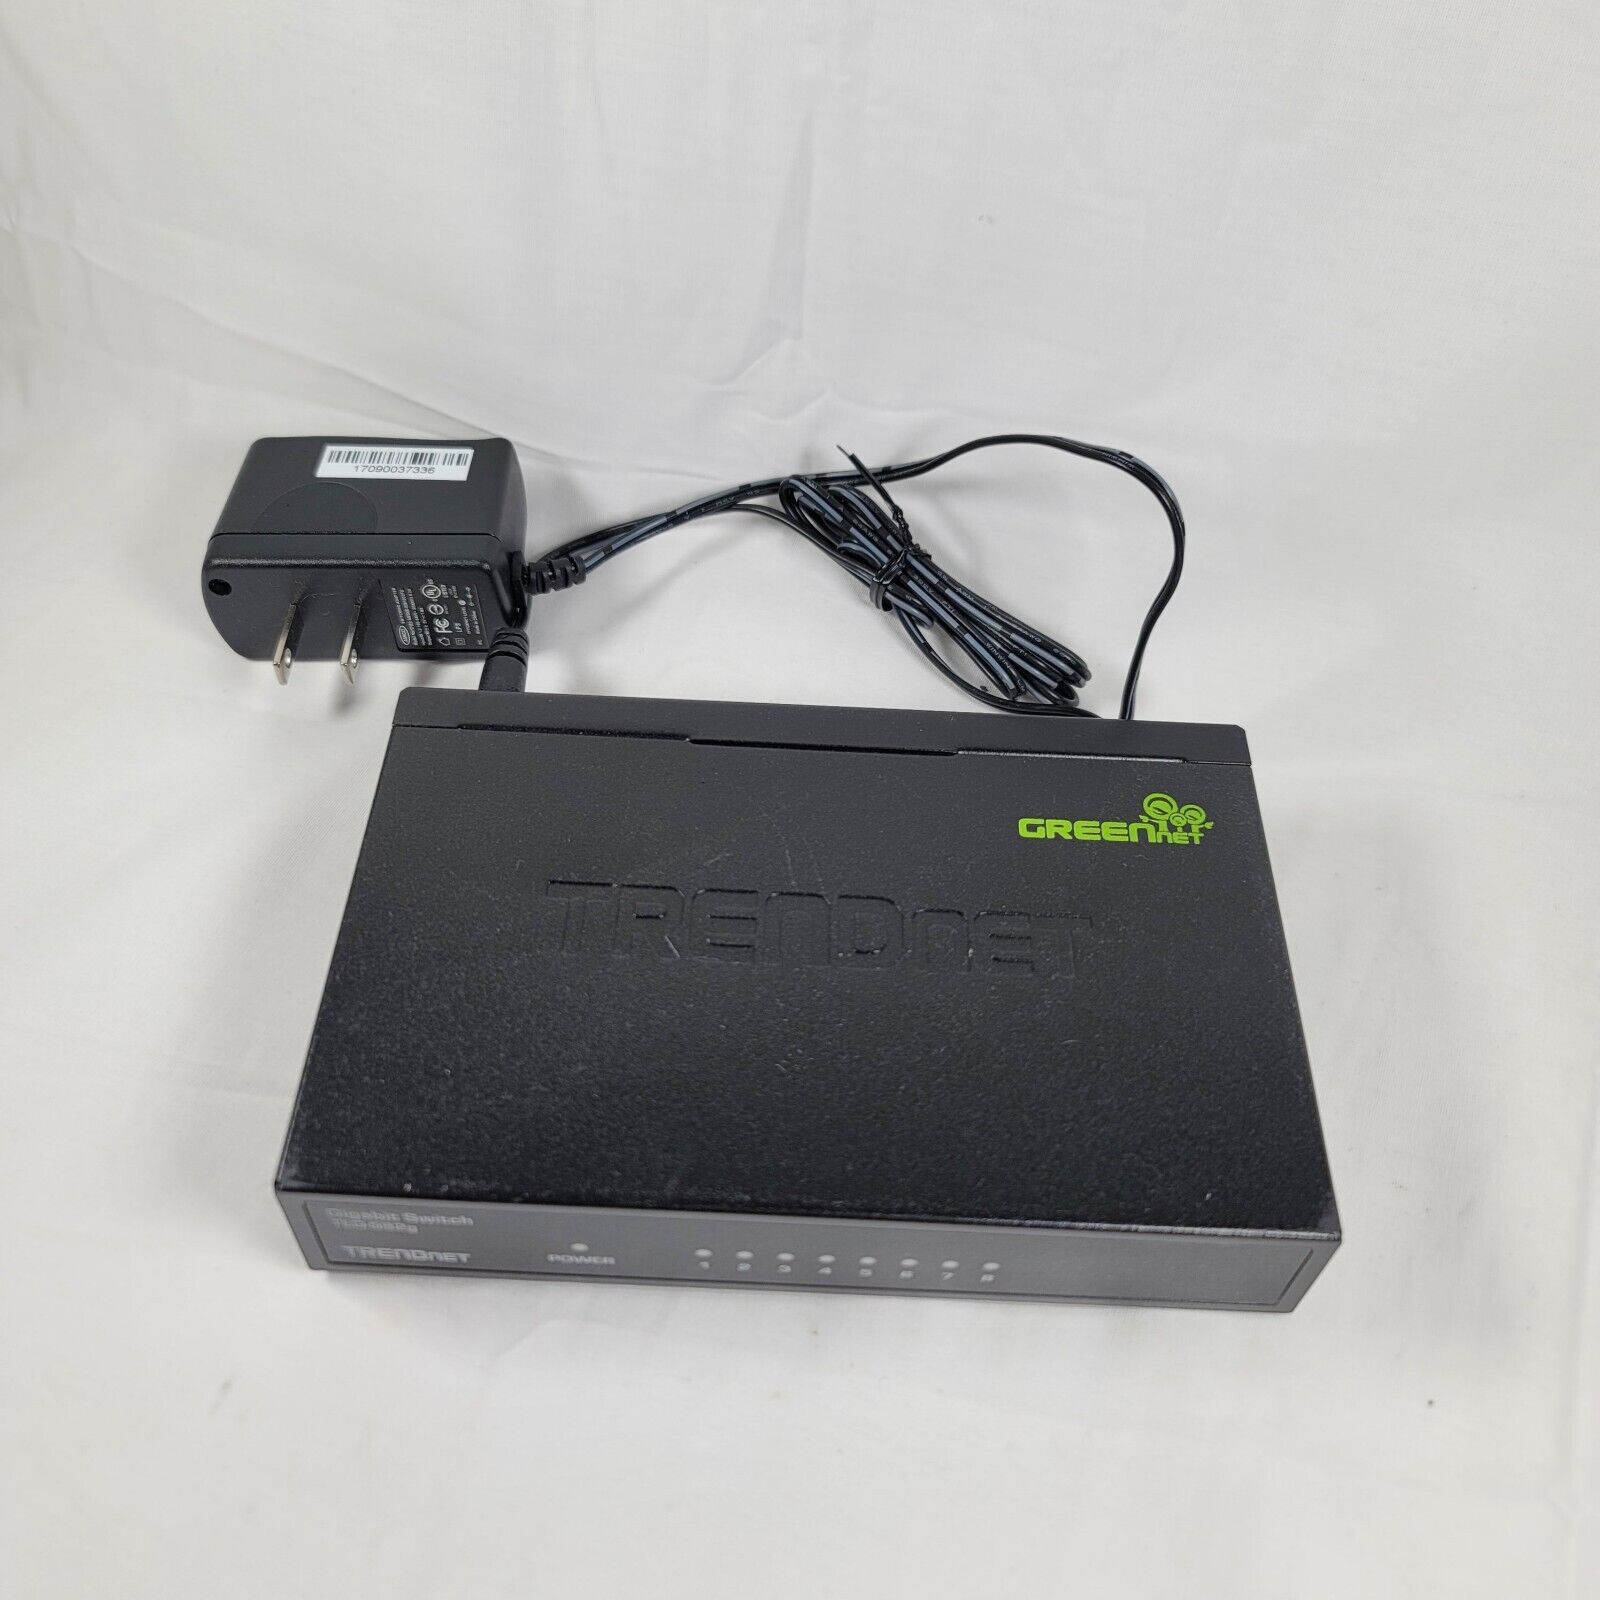 TRENDnet  TEG (TEGS82g) 8-Ports External Ethernet Switch with power adapter